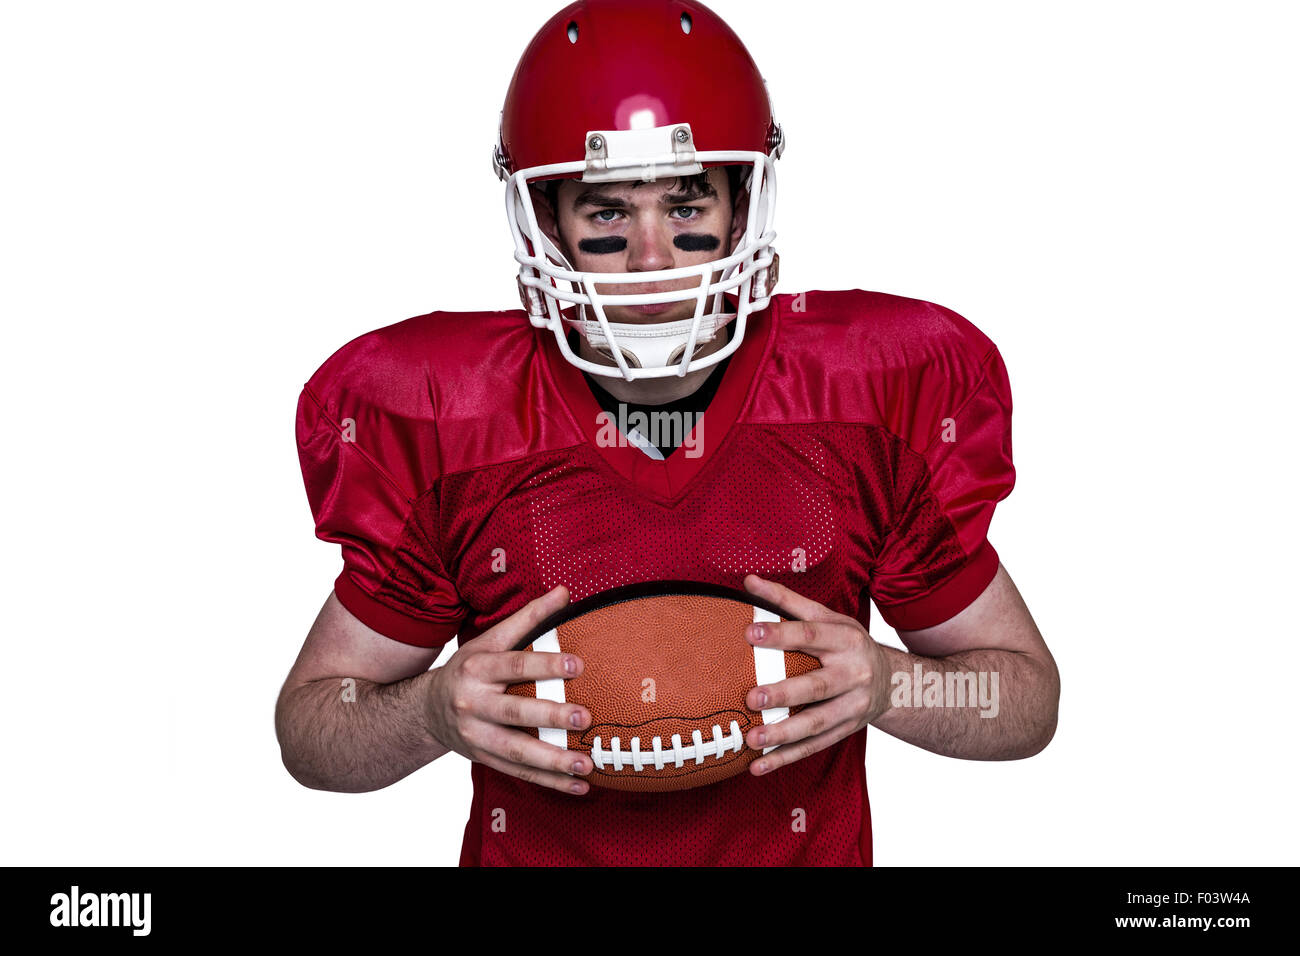 American football player holding a ball Banque D'Images